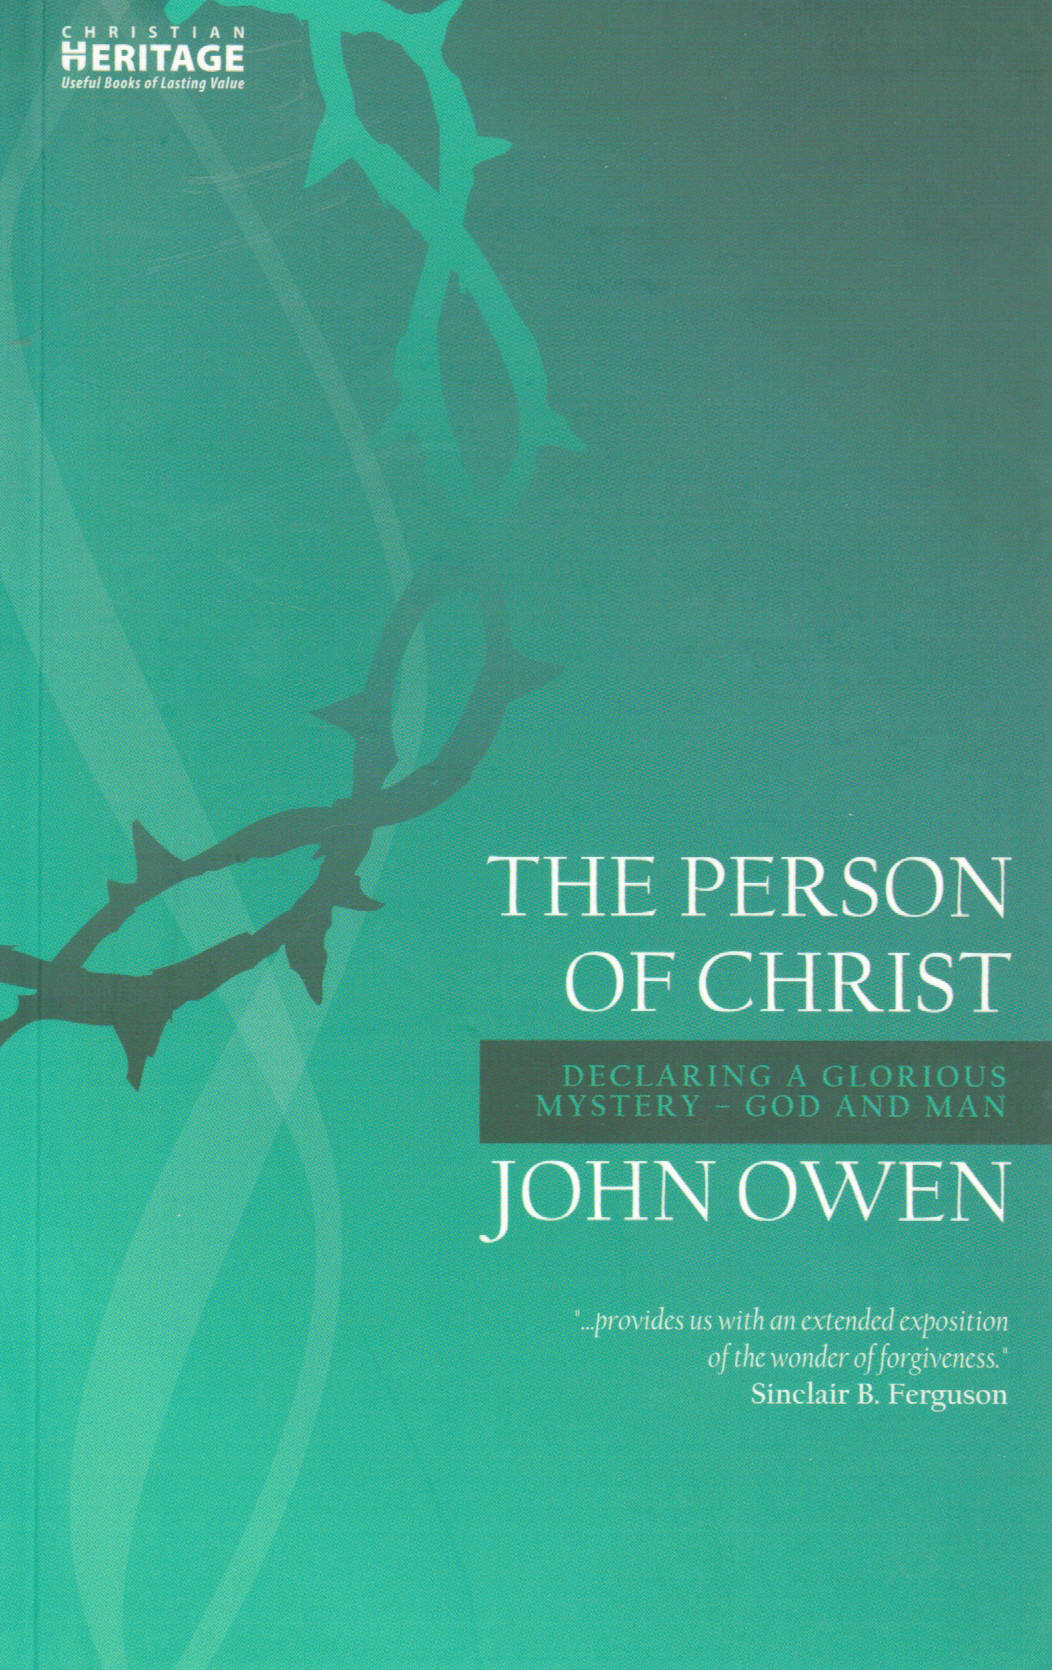 The Person of Christ: Declaring a Glorious Mystery - God and Man